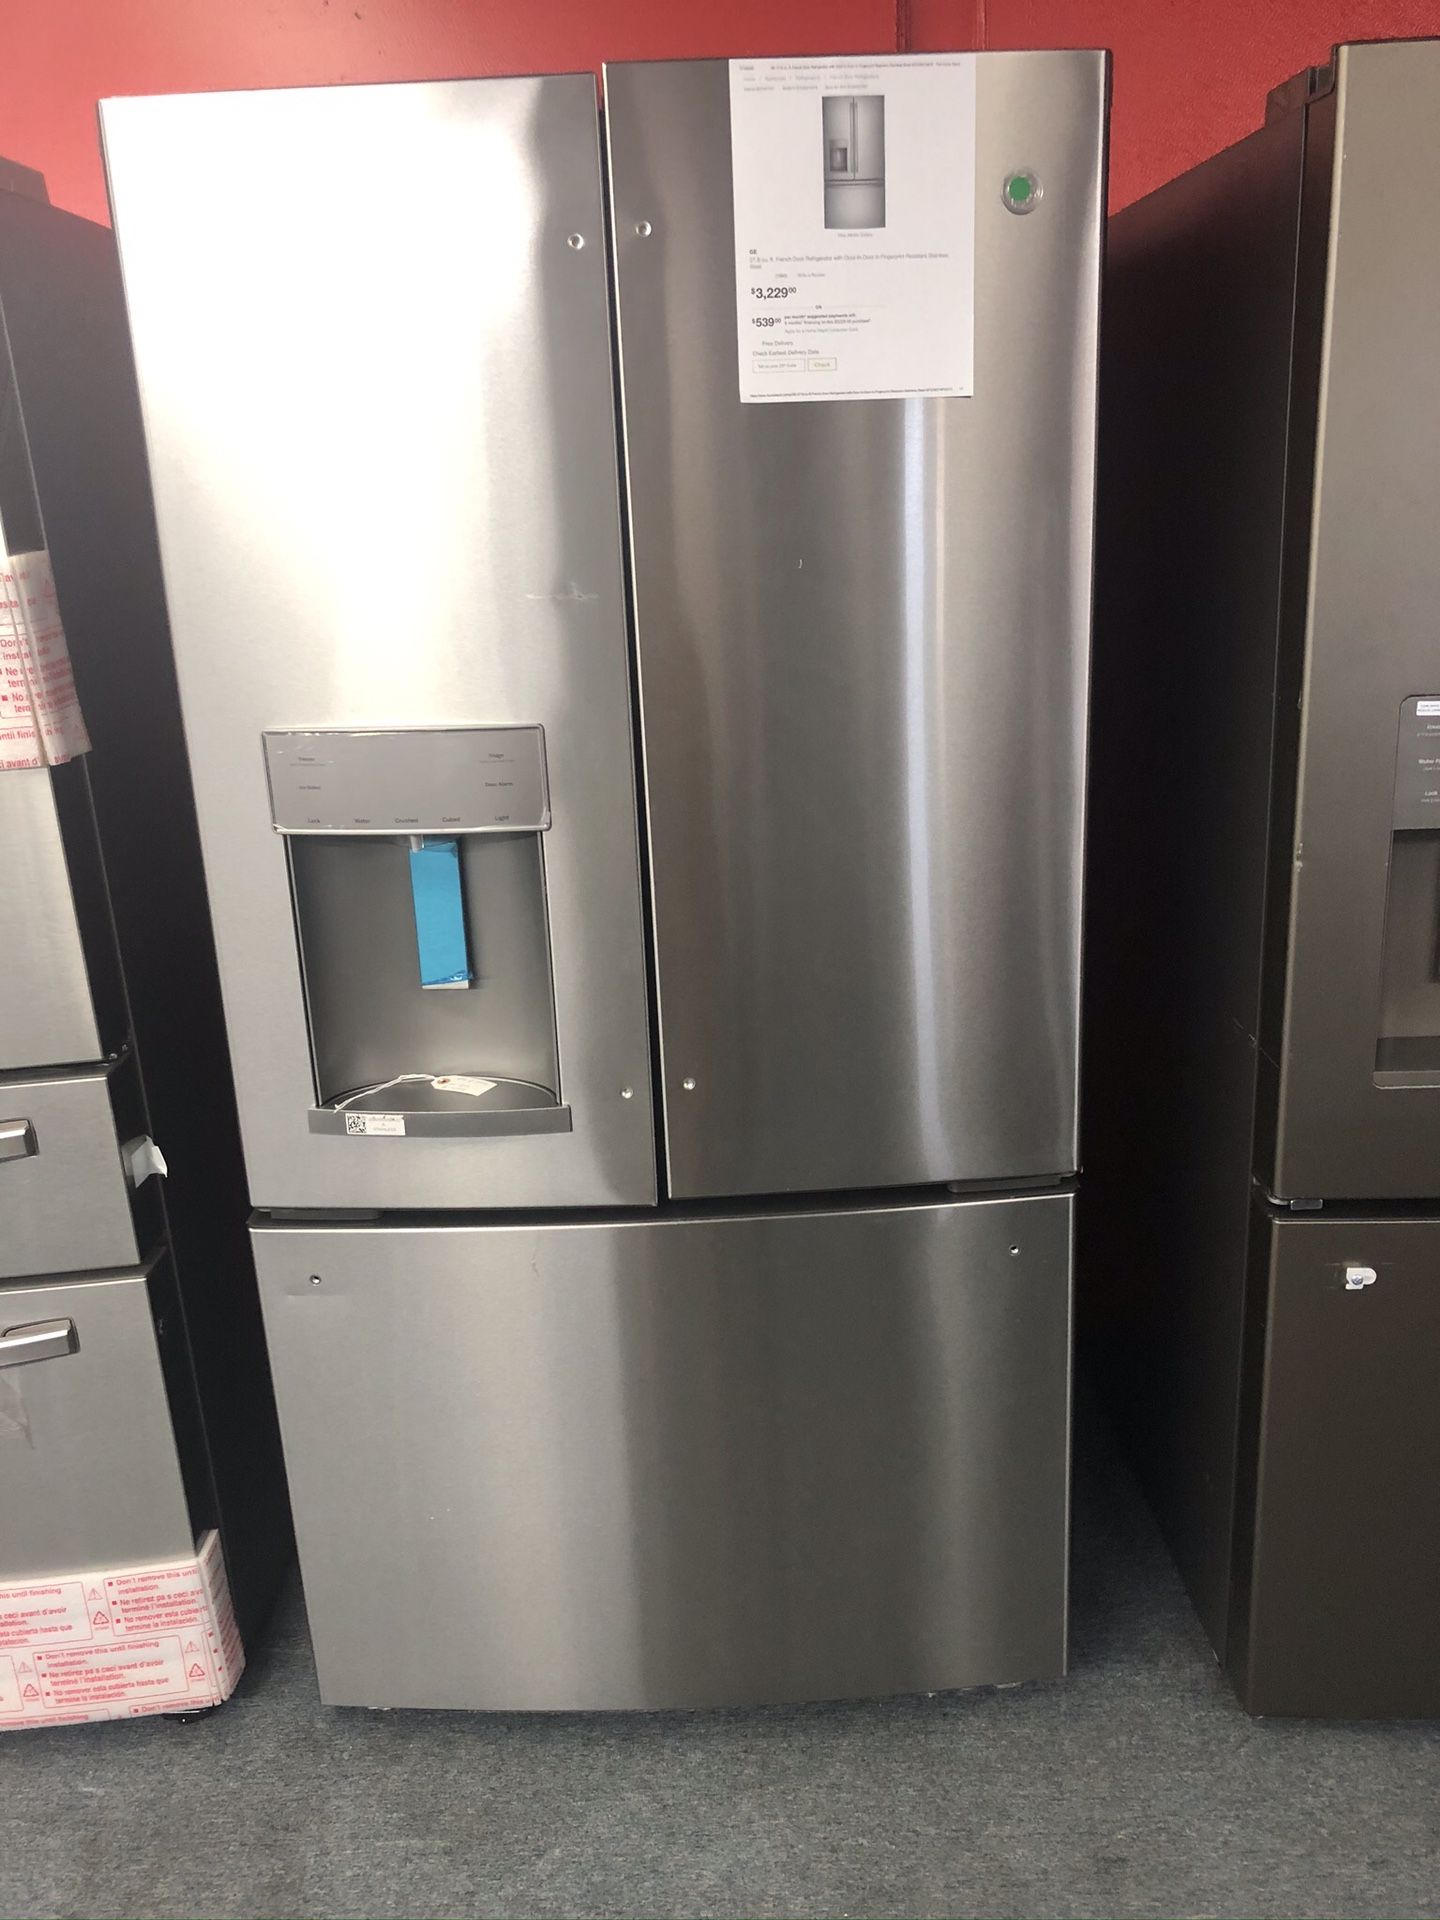 New scratch and dent GE 27 cu ft stainless steel French door fridge. 1 year warranty